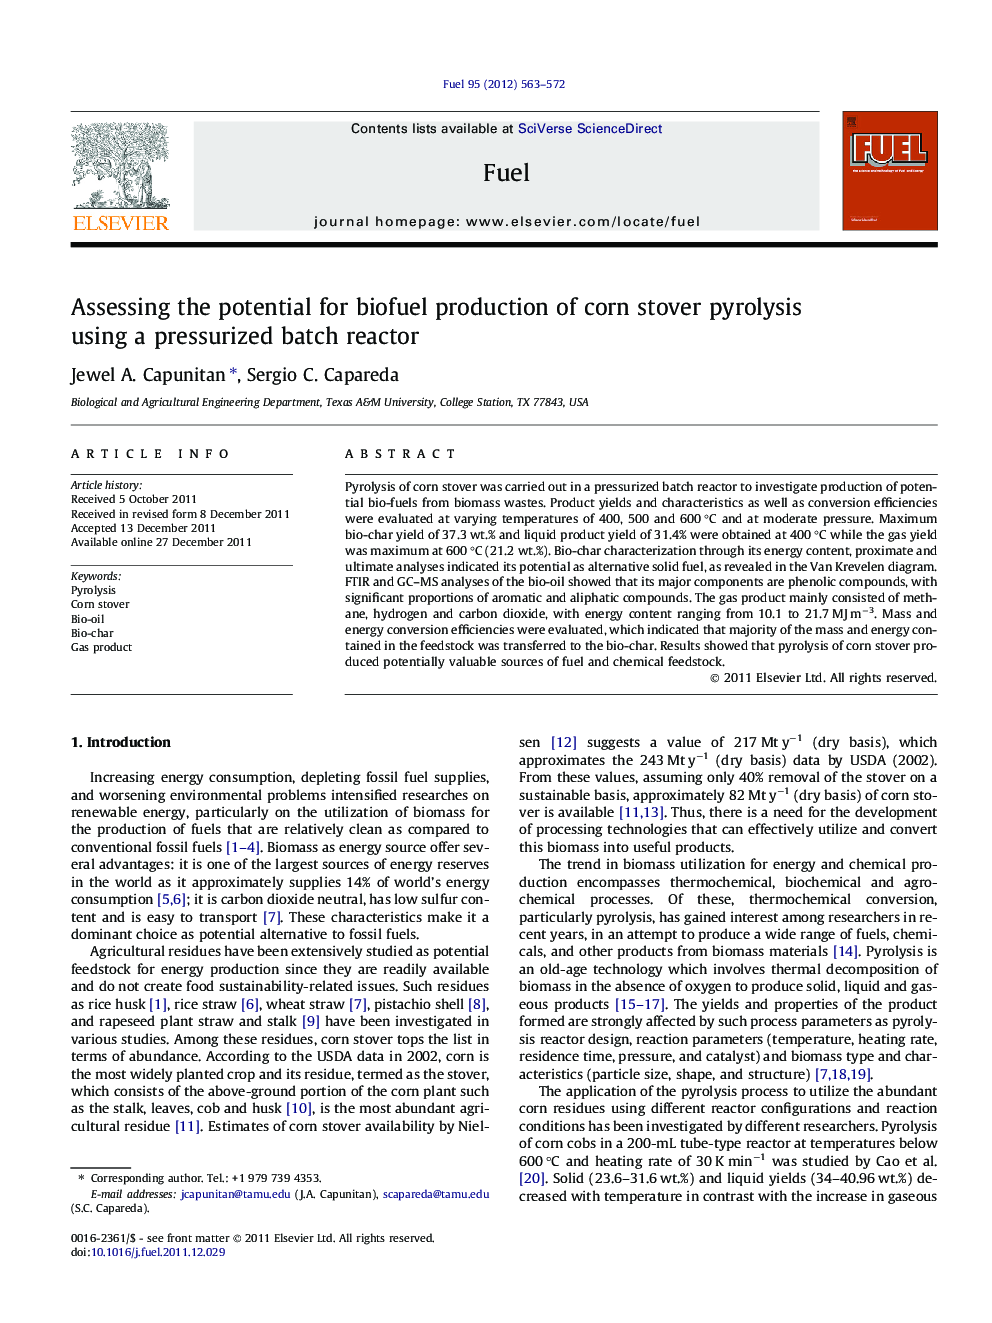 Assessing the potential for biofuel production of corn stover pyrolysis using a pressurized batch reactor